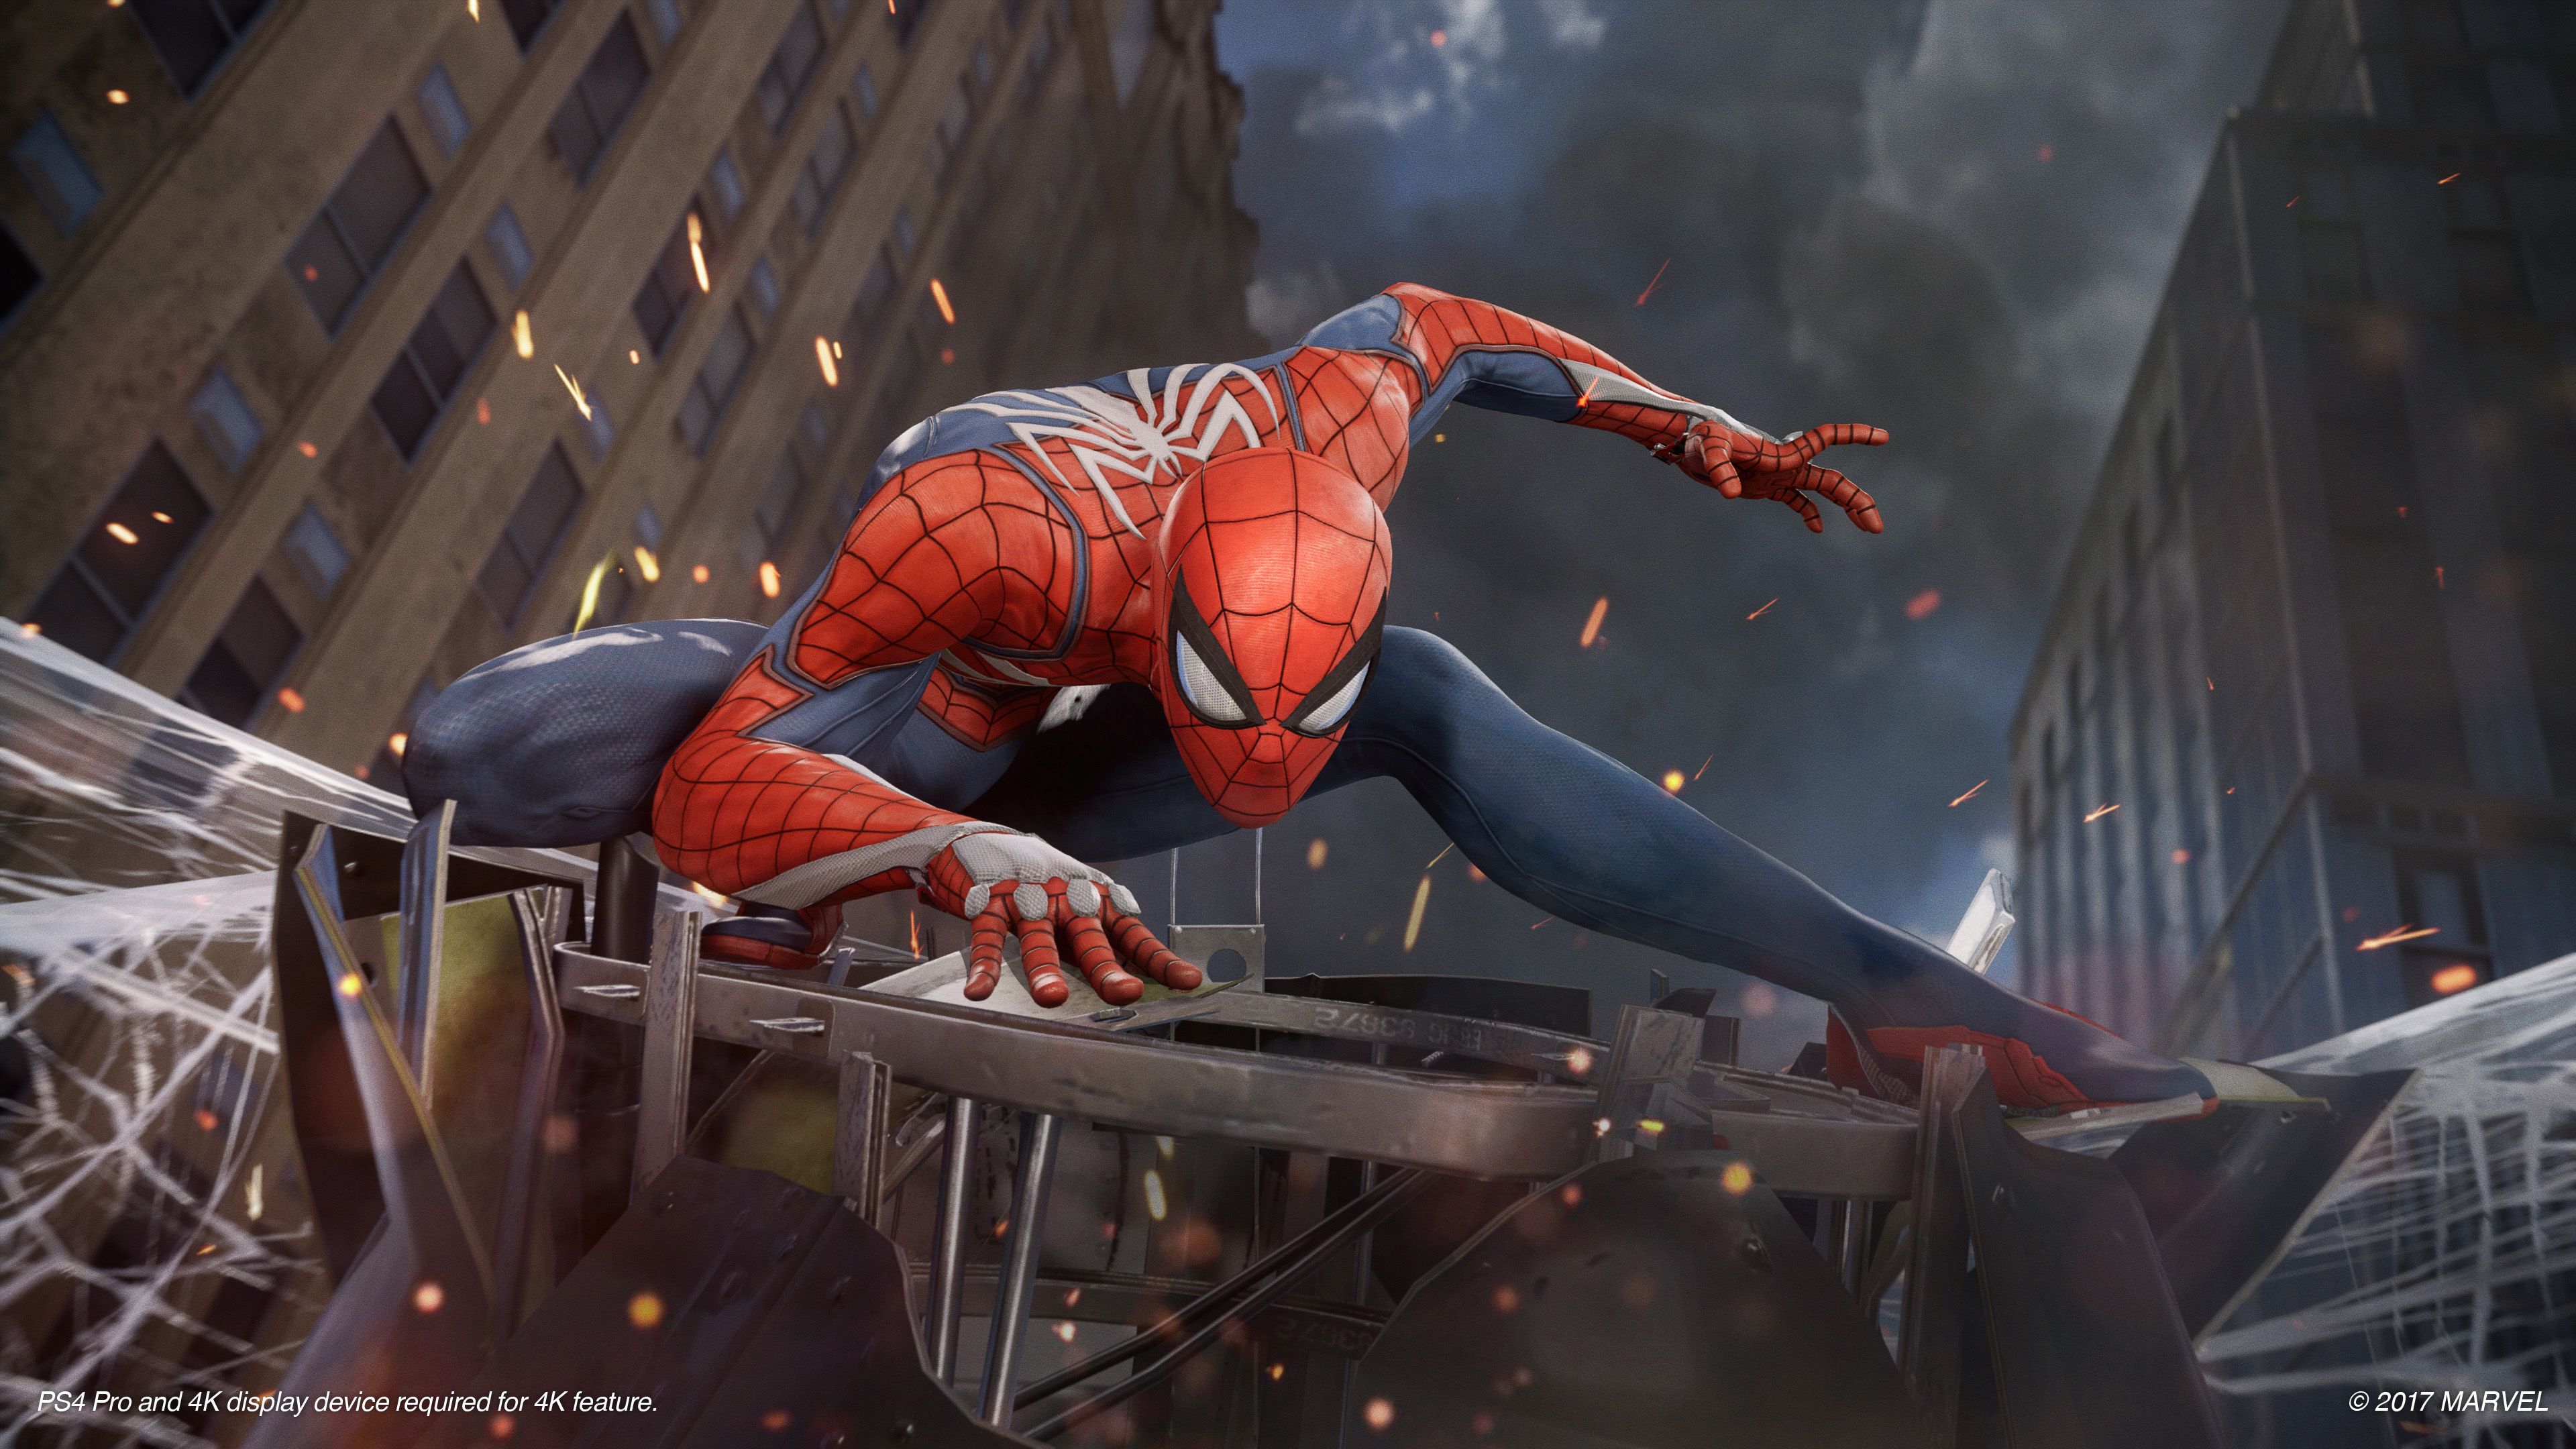 SpiderMan PS4 Is Coming Out On September 7th